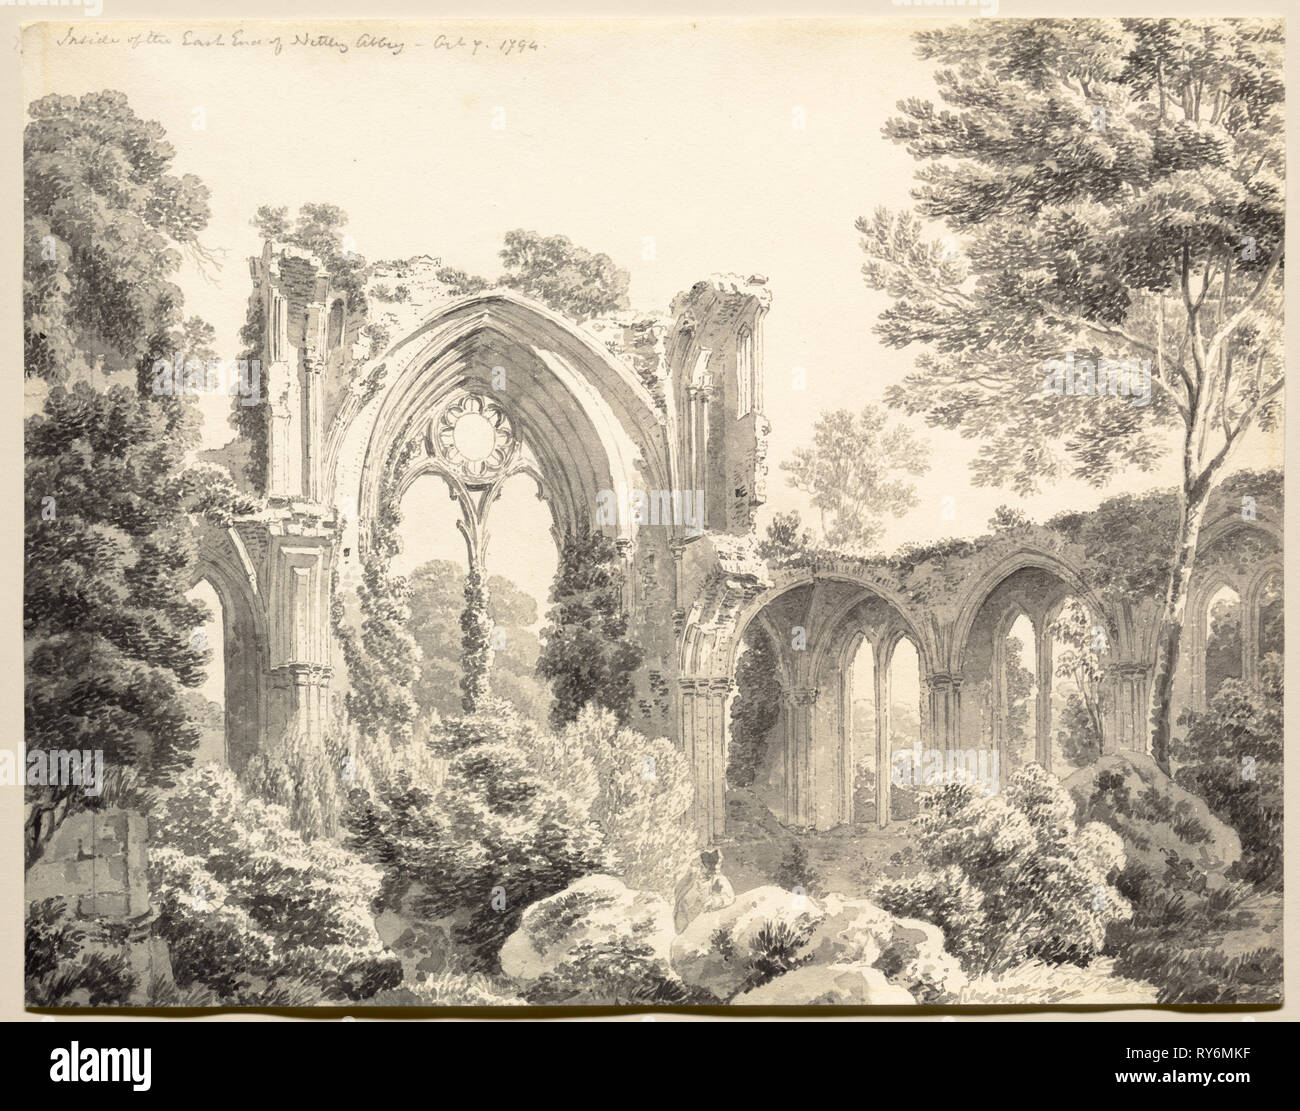 Inside the East End of Nettley Abbey, 1794. Michel Angelo Rooker (British, 1746-1801). Gray wash with extensive point of brush with traces of graphite; squared with graphite; overall: 23.5 x 30.2 cm (9 1/4 x 11 7/8 in Stock Photo